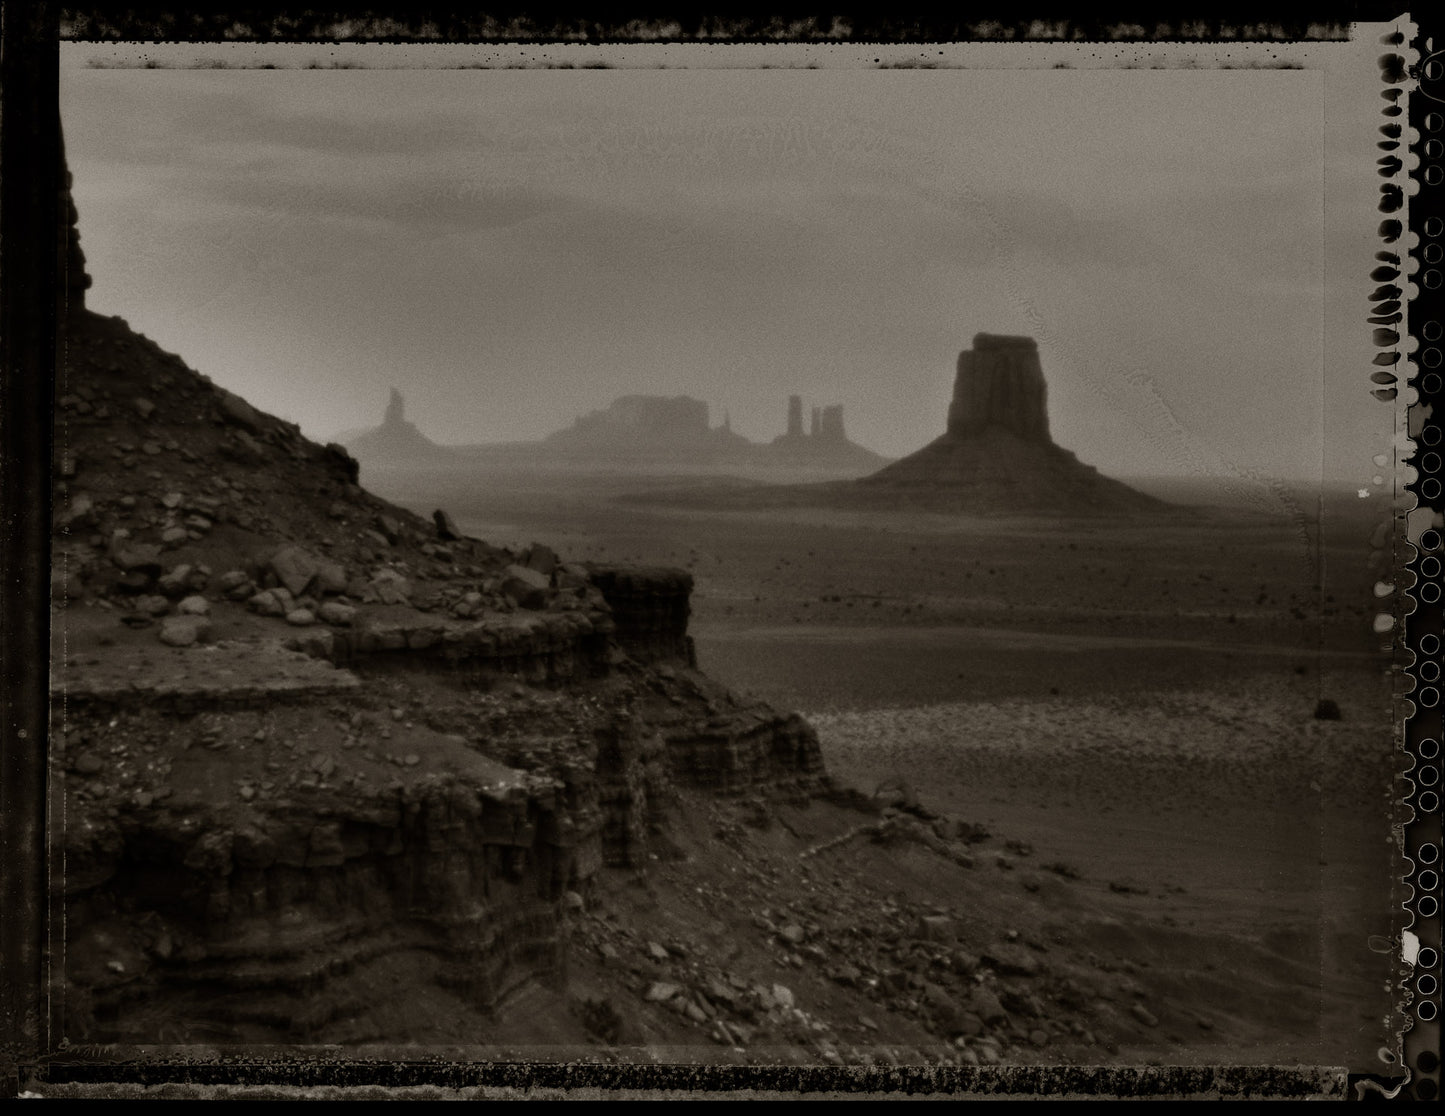 Alternate View Of Monument Valley